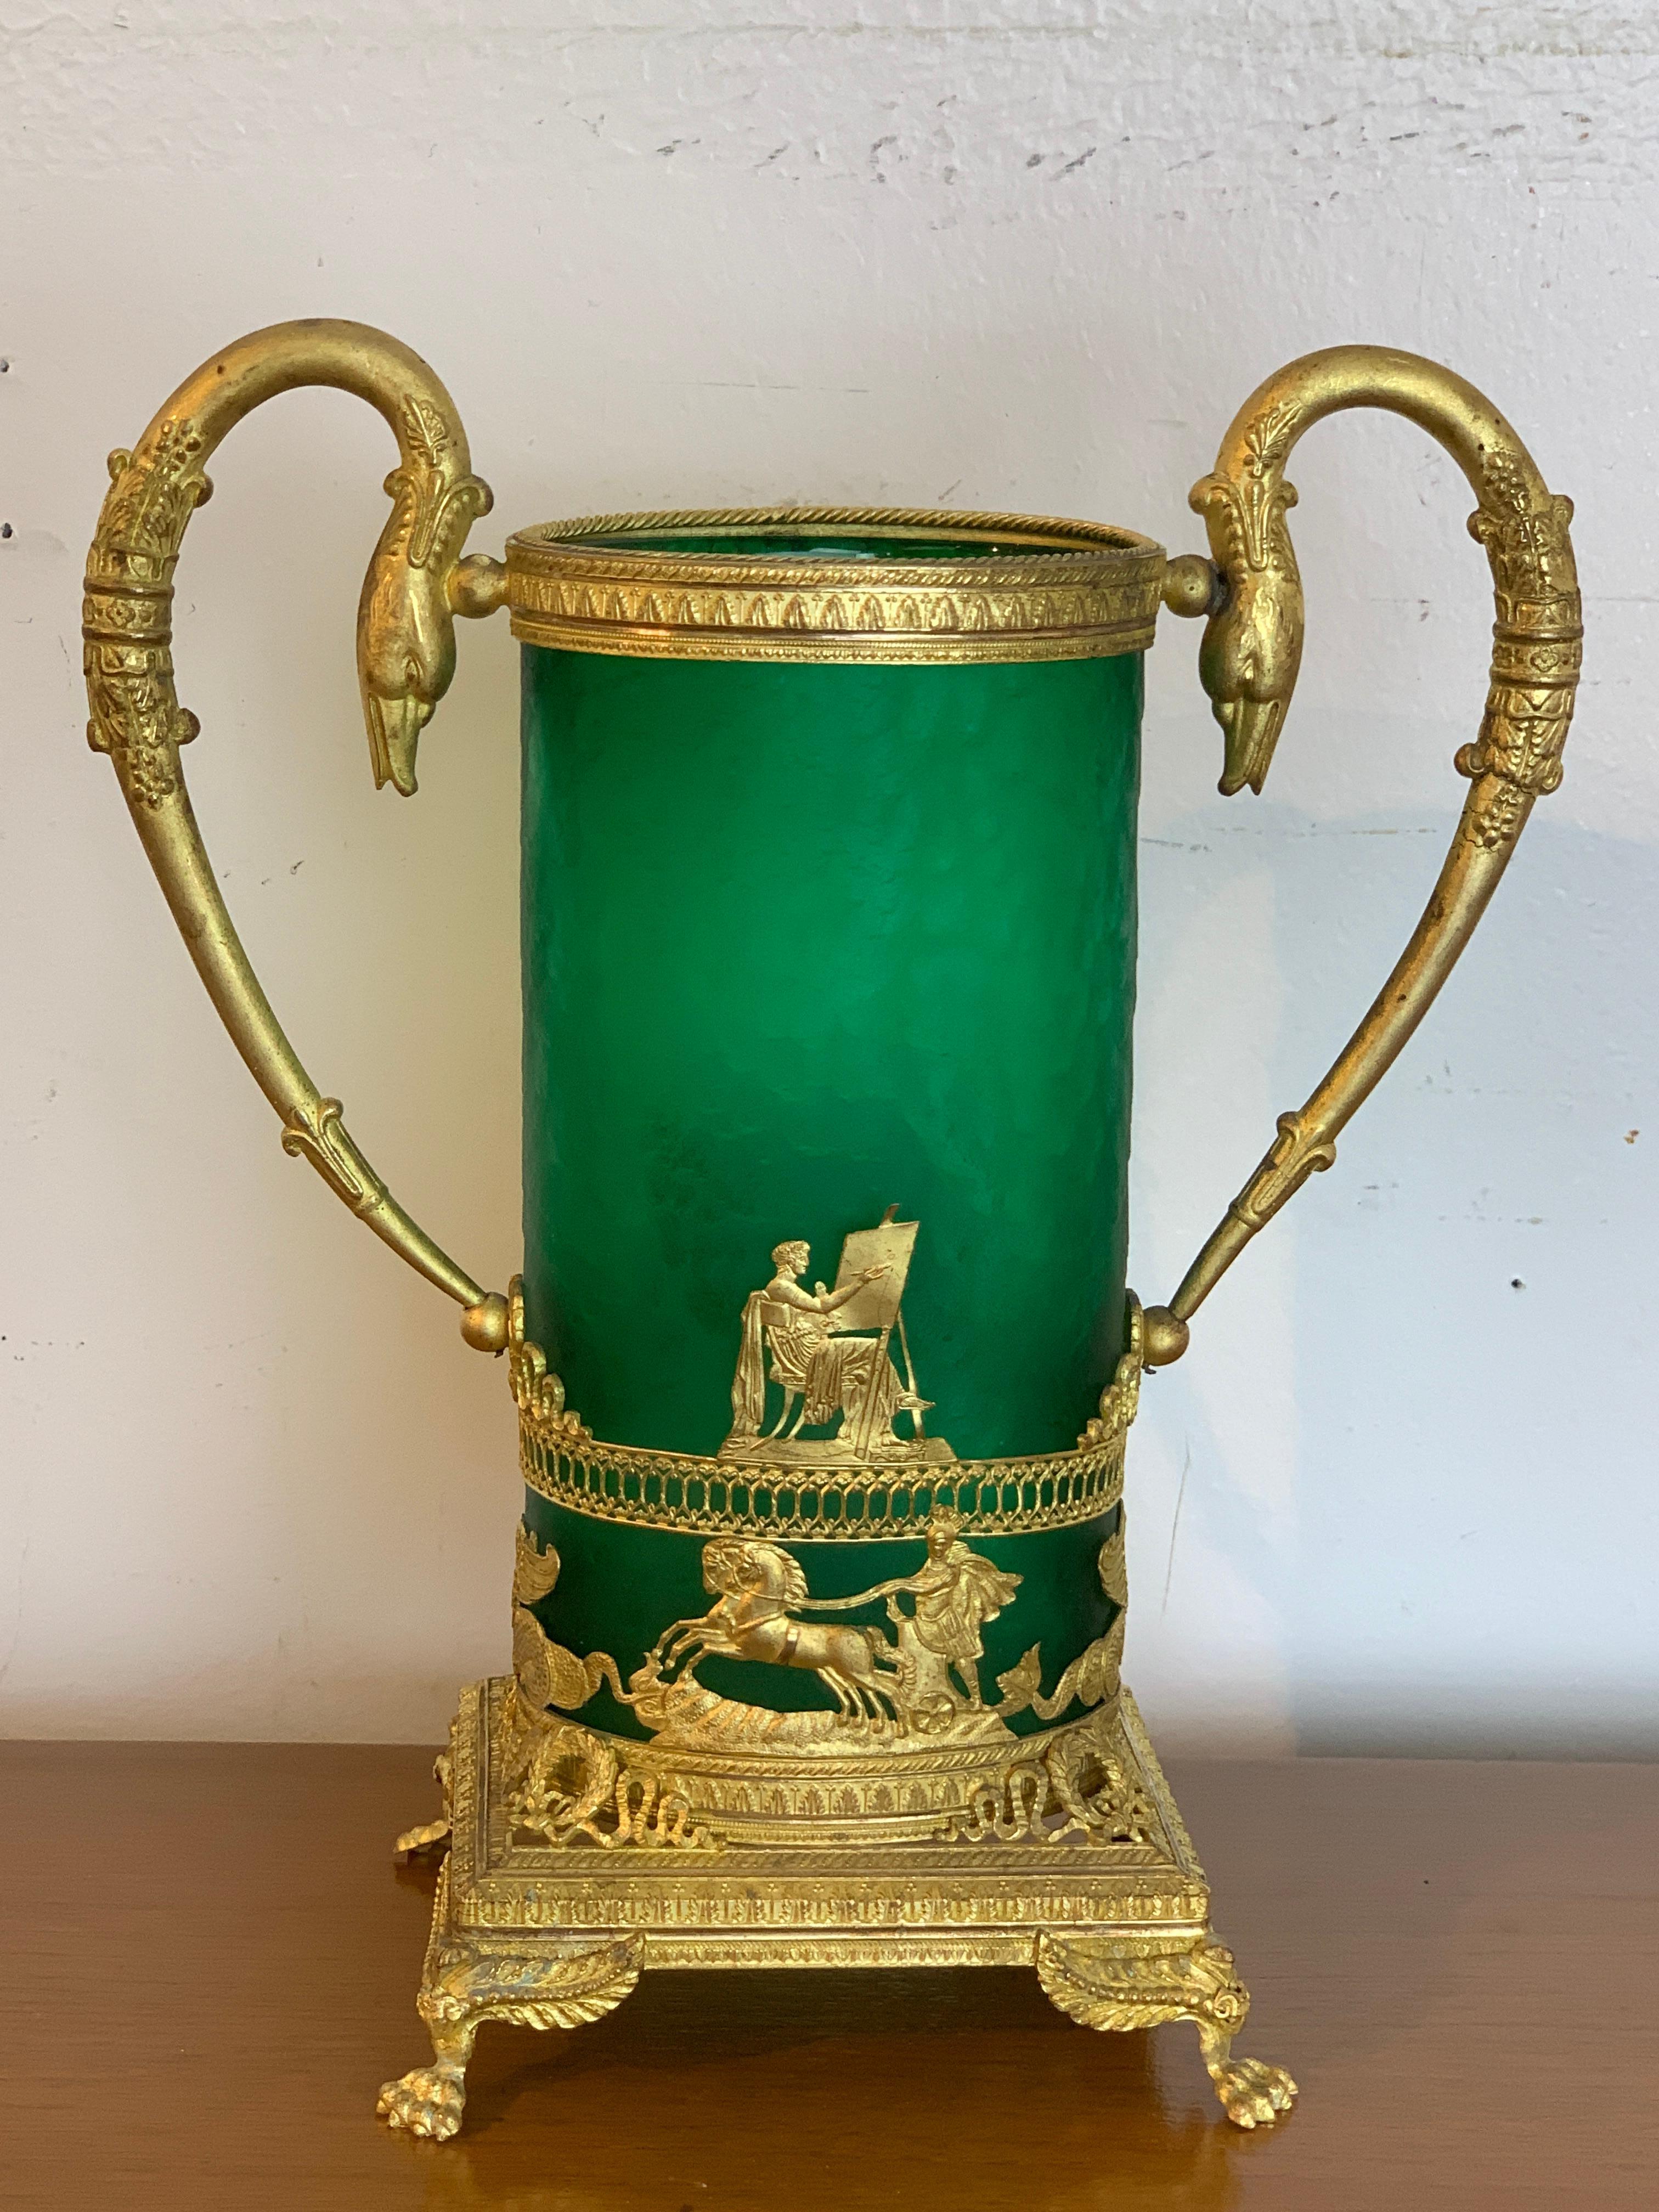 Exquisite Baccarat Empire Style Ormolu Mounted Vase, in Green 1